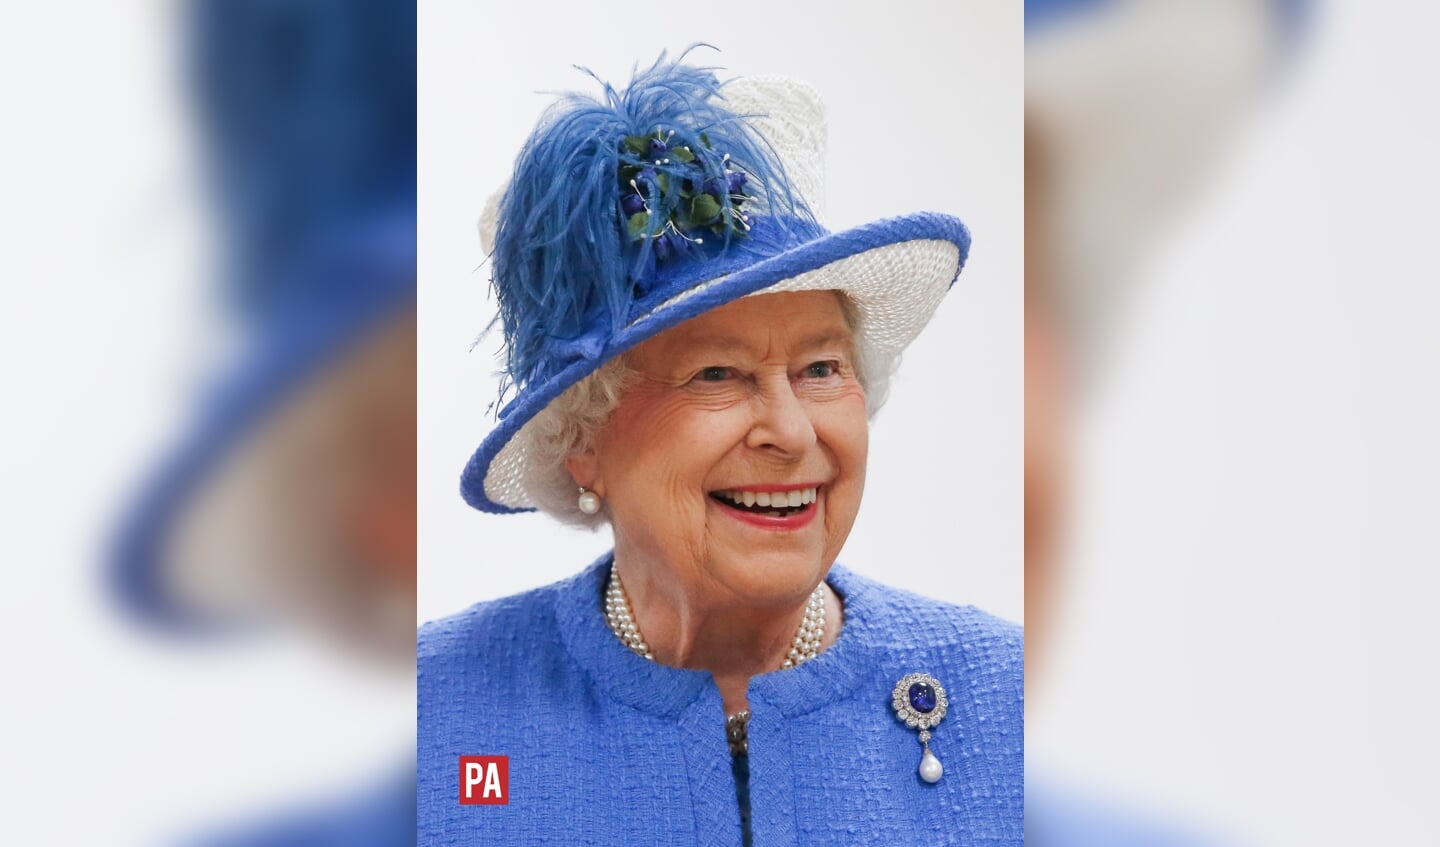 This photograph is made available for charities and not-for-profit organisations who wish to use a picture to mark the 90th birthday of Queen Elizabeth II. It may not be used for merchandising or any commercial publication, and the logo in the bottom left of the picture must not be removed or obscured.  The picture should be credited: PRESS ASSOCIATION / Danny Lawson.